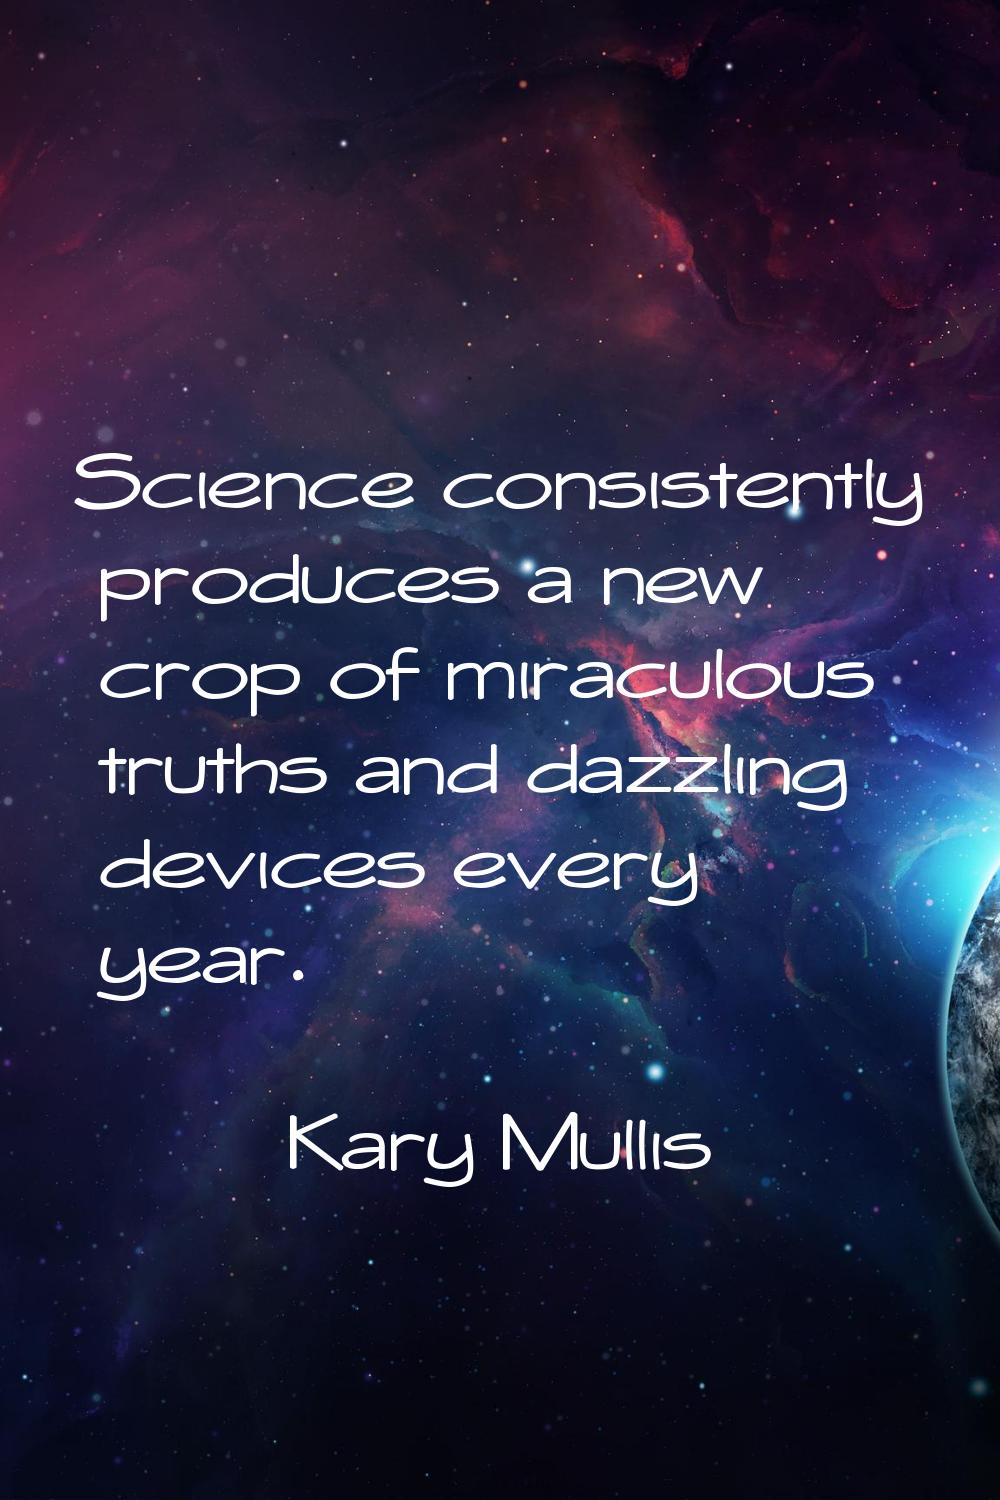 Science consistently produces a new crop of miraculous truths and dazzling devices every year.